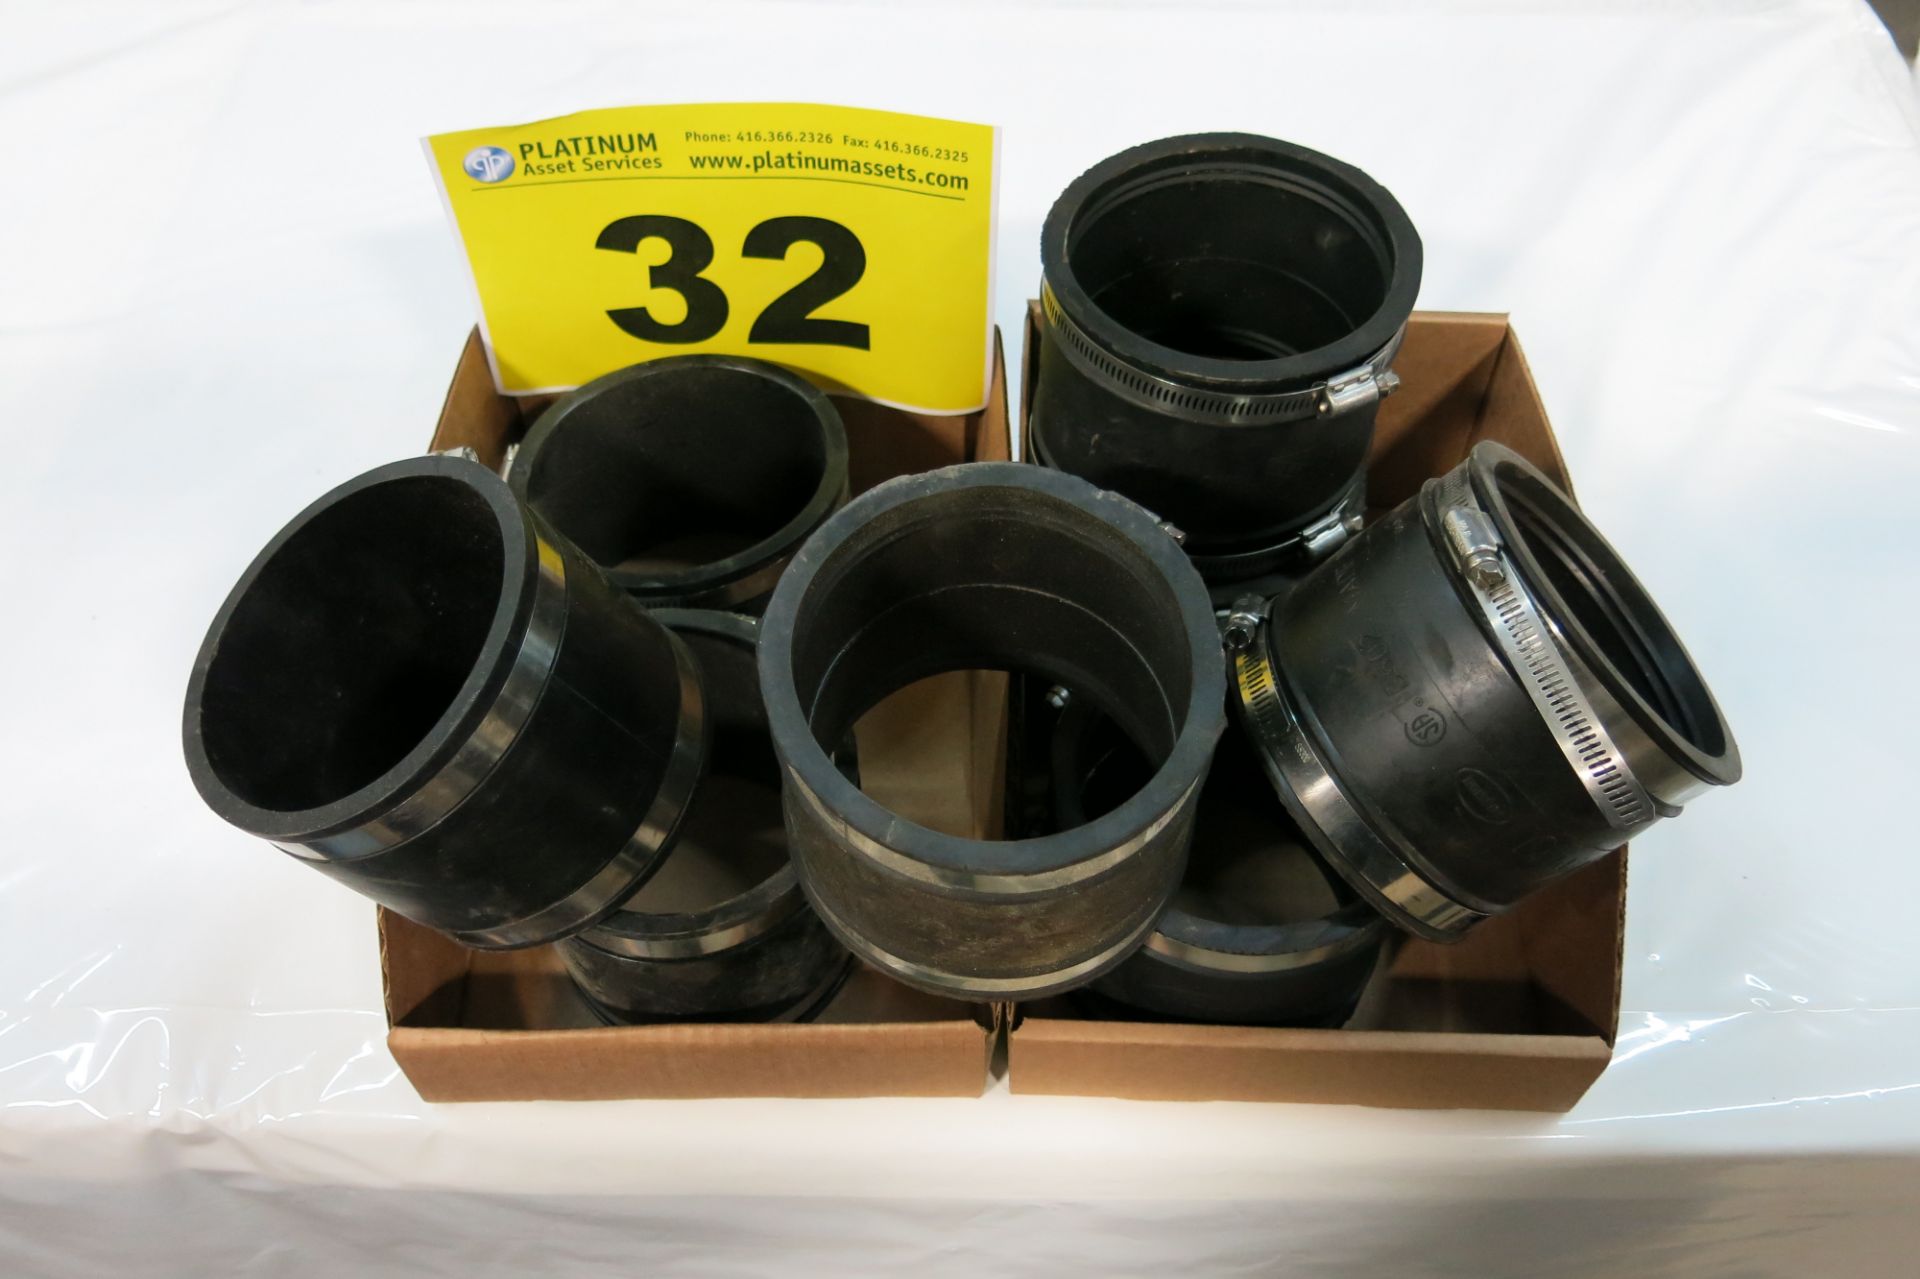 LOT OF RUBBER 4" COUPLINGS - NEW (LOCATED IN SCARBOROUGH)